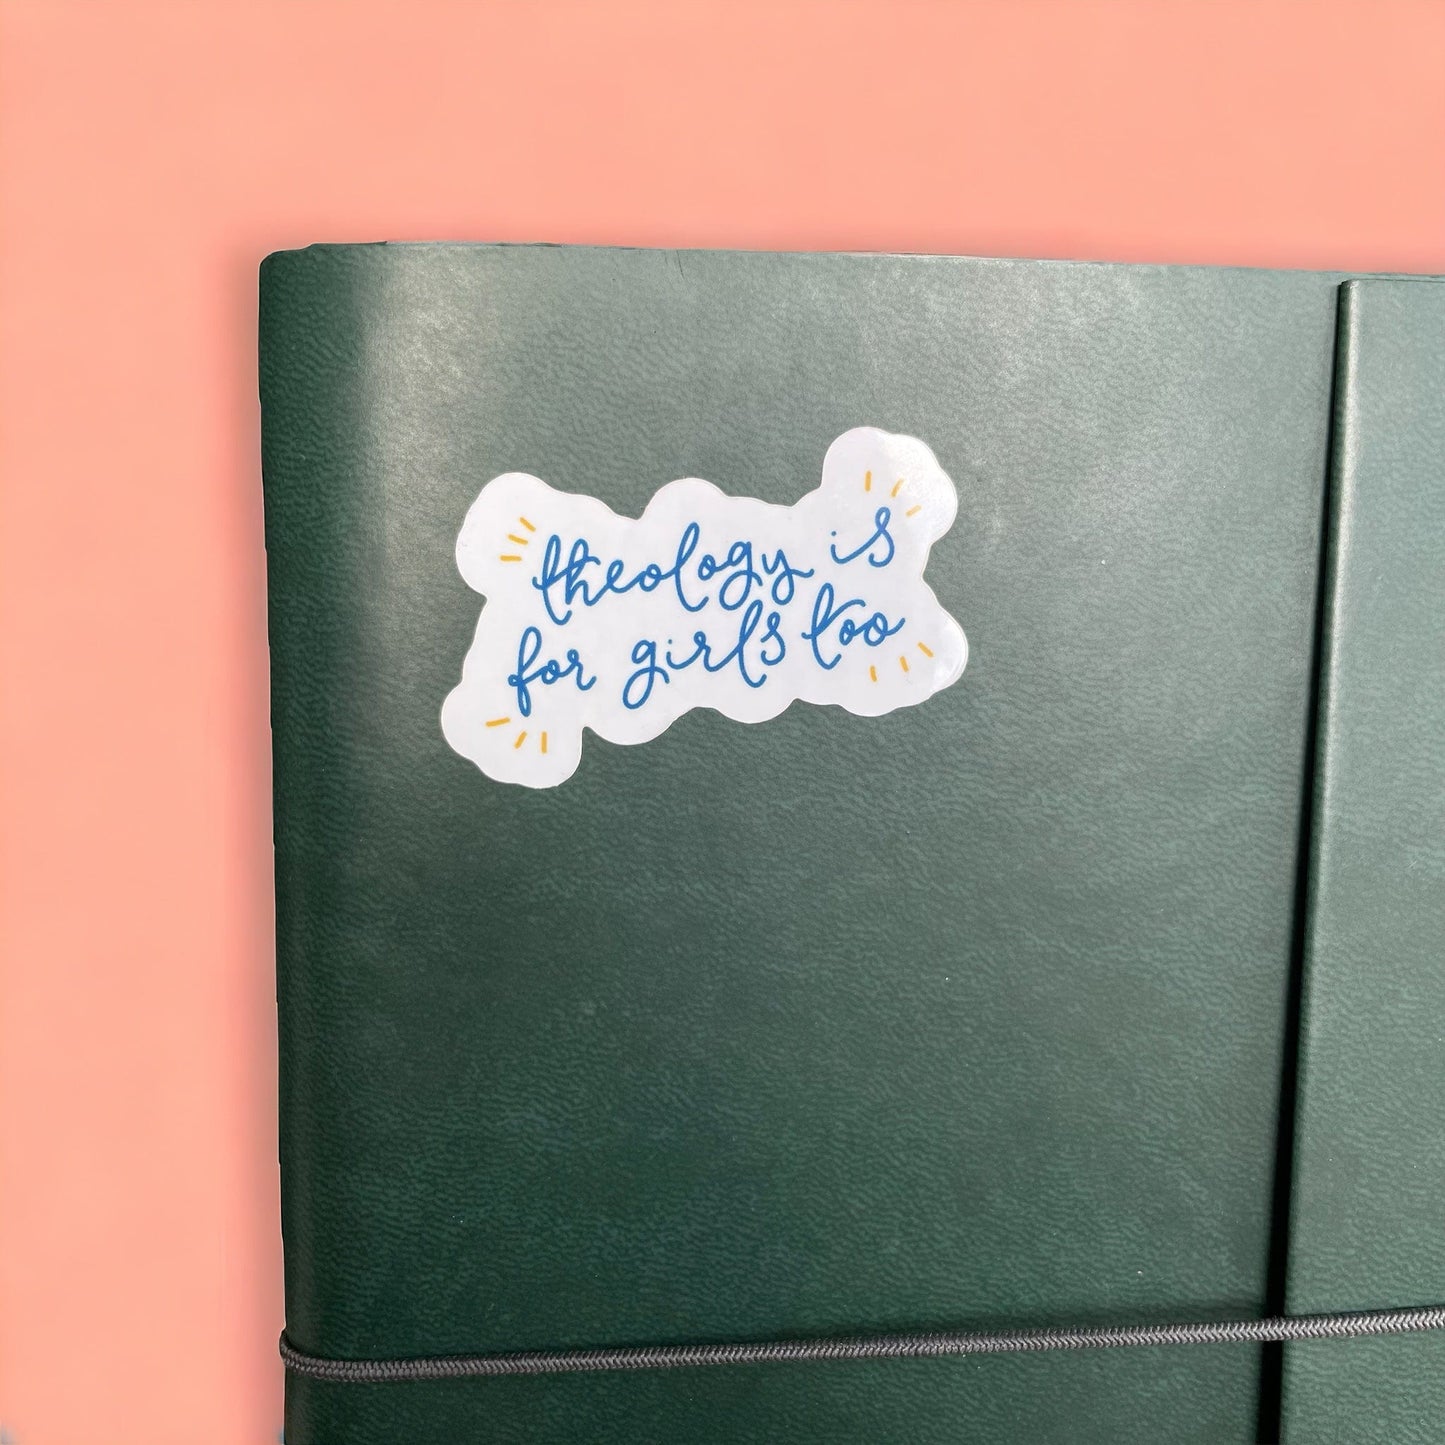 And Hope Designs stickers Theology is for girls too - Christian sticker - vinyl